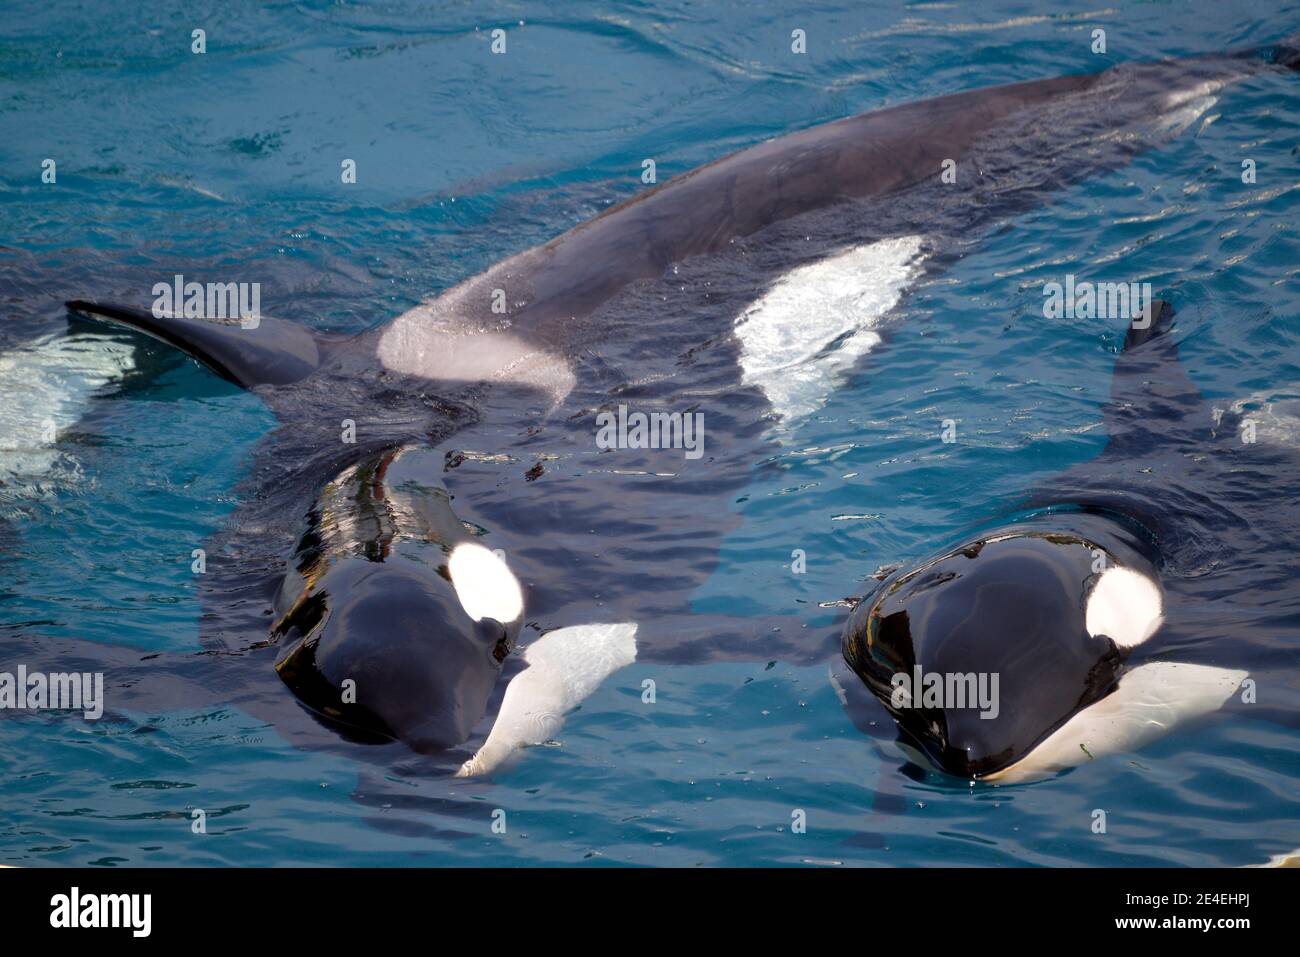 Two killer whales (Orcinus orca) lying in blue water Stock Photo